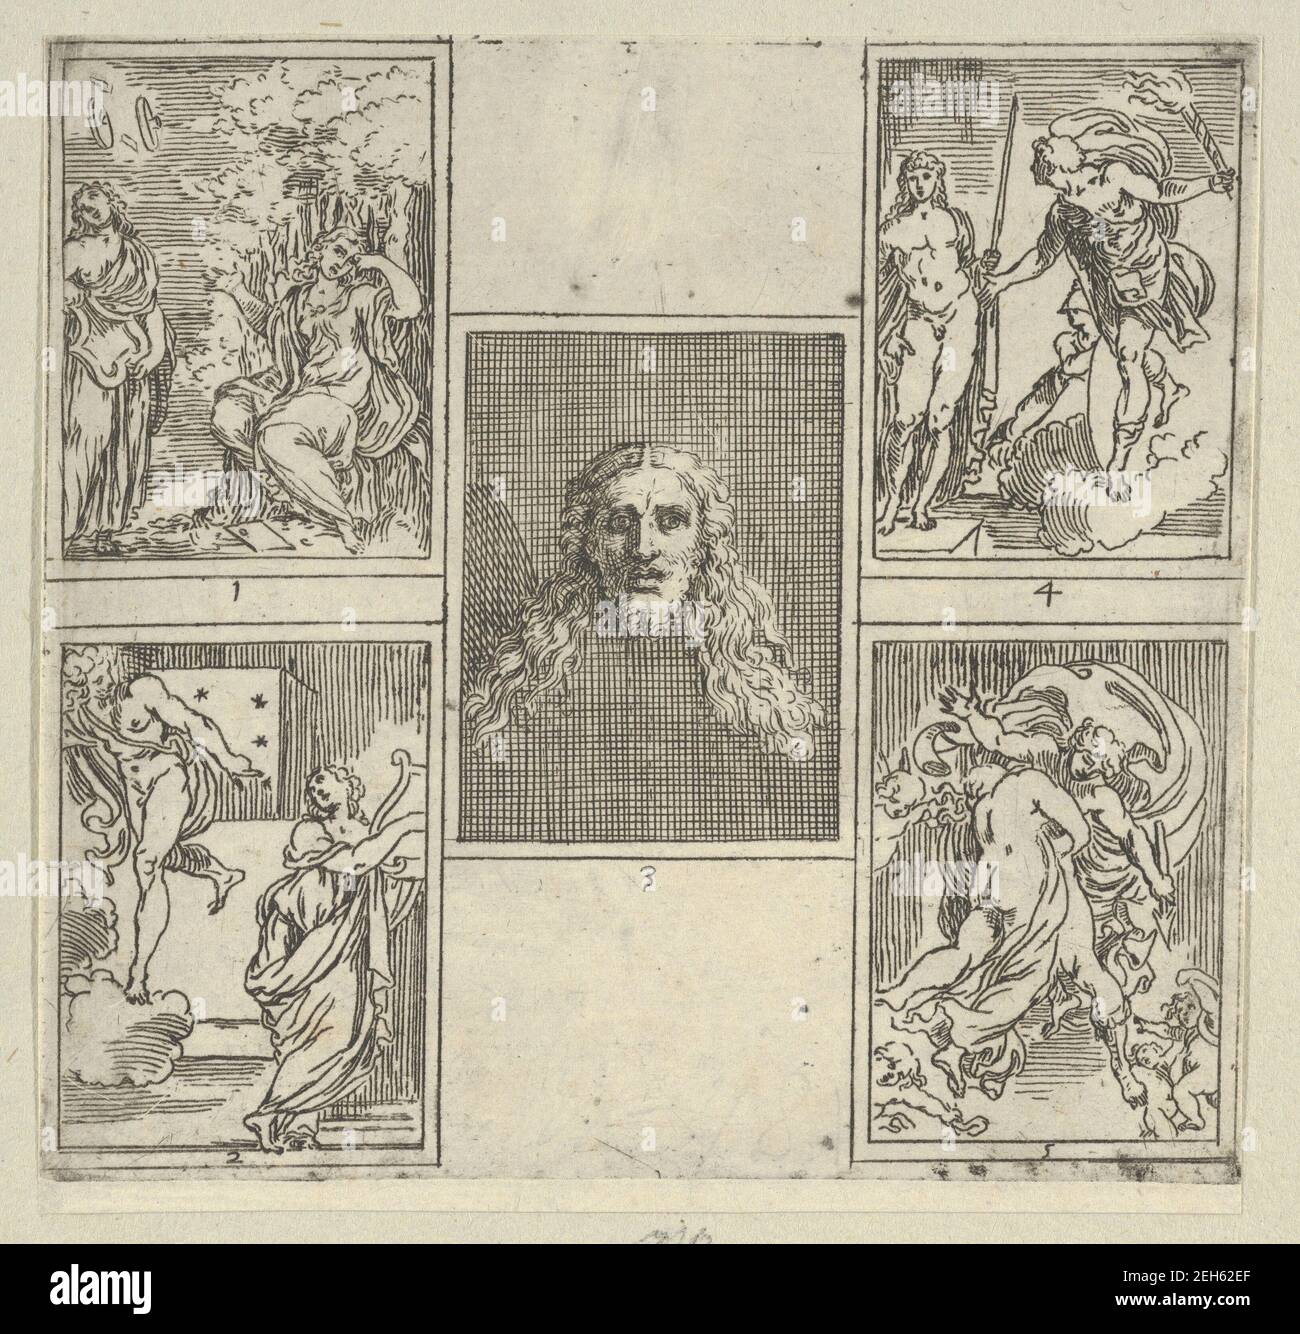 Five numbered scenes, each after a painter in the Accademia Degl'Incamminati, from IL FUNERALE D'AGOSTINO CARRACCIO FATTO IN BOLOGNA SUA PATRIA DAGL'INCAMINATI Academici del Disegno: 1. Painting and Poetry mourning the death of Agostino Carracci, painted by Francesco Brizio; 2. Painting with a lyre and Apollo pointing to stars on Carracci's grave, design by Giacomo Cavedone; 3. The head of Christ, painted by Agostino Carracci; 4. Prometheus with a torch and Athena behind him, painted by Alessandro Albini; 5. Aurora abducting Cephalus, painted by Leonello Spada., 1603. Stock Photo